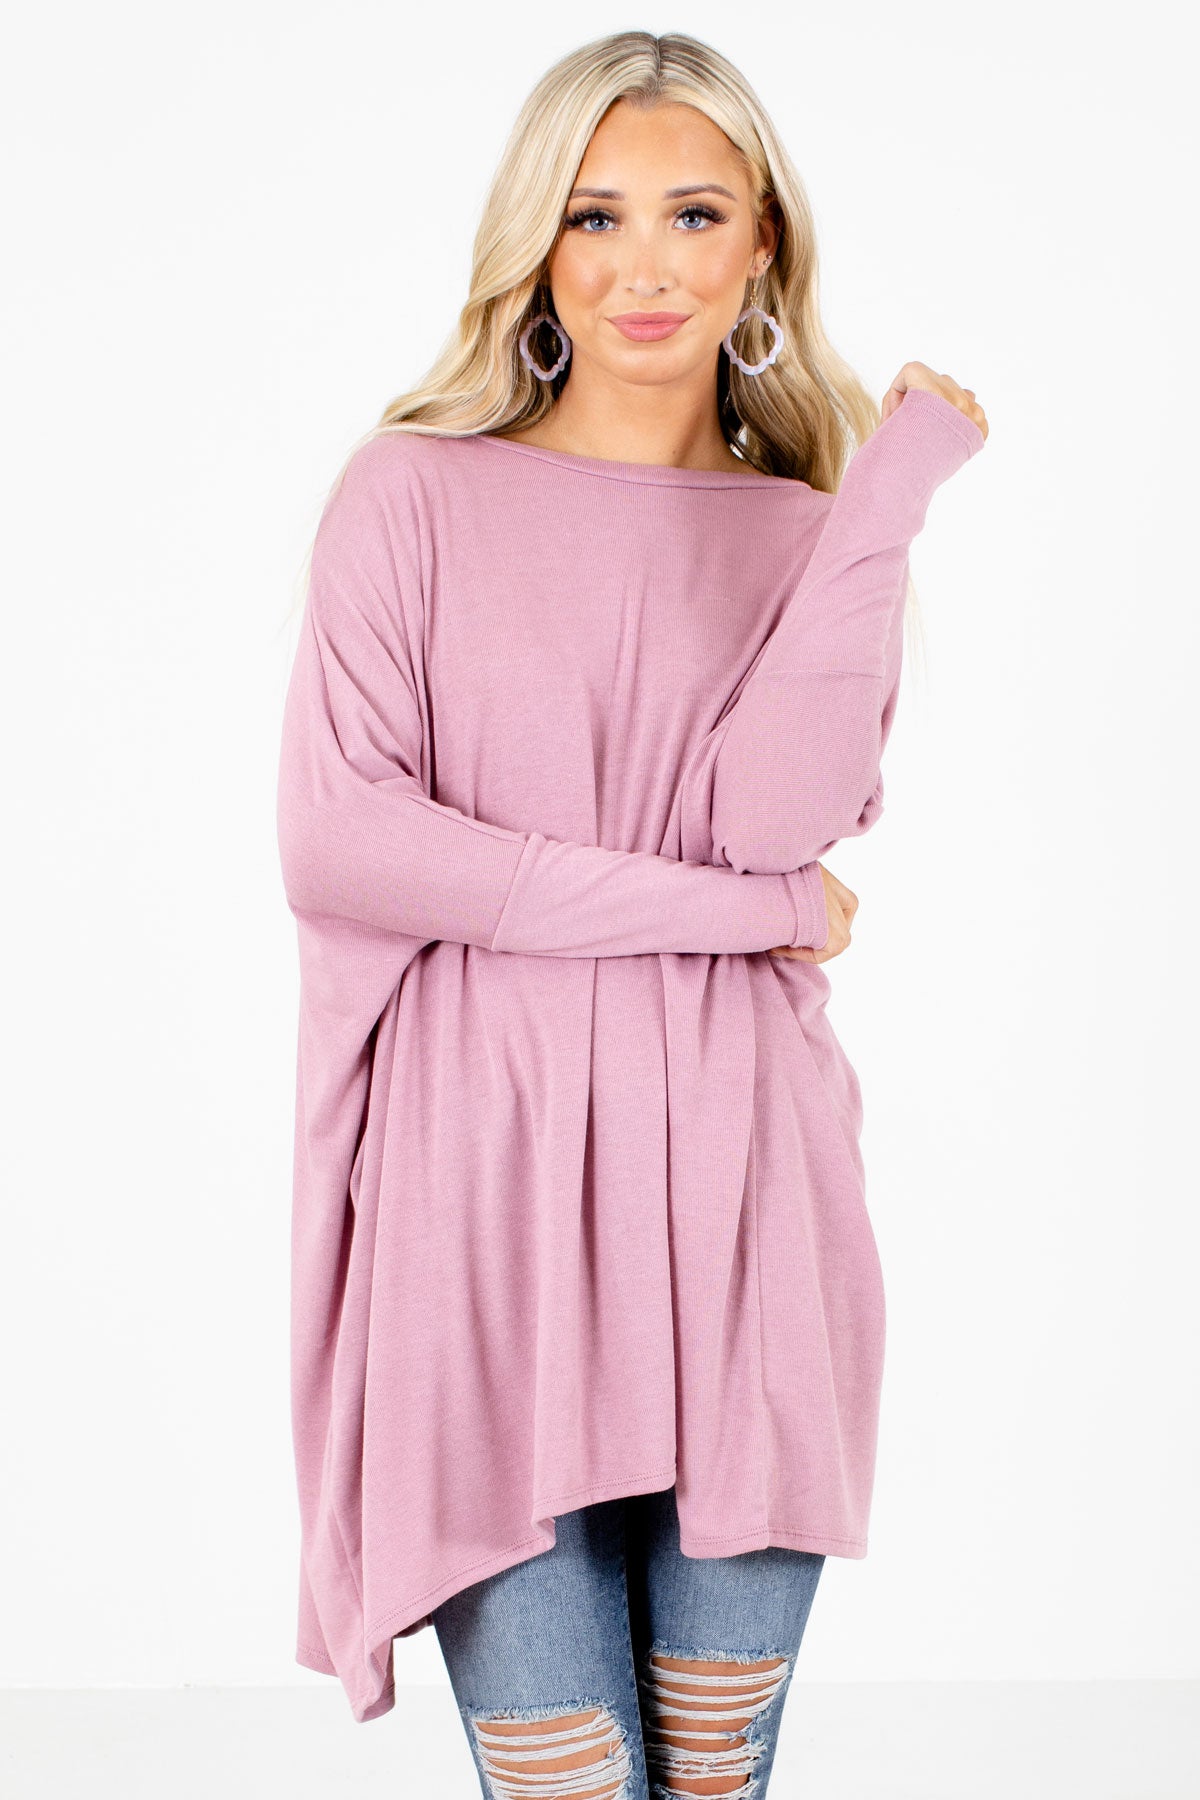 Pink Oversized Fit Boutique Tops for Women